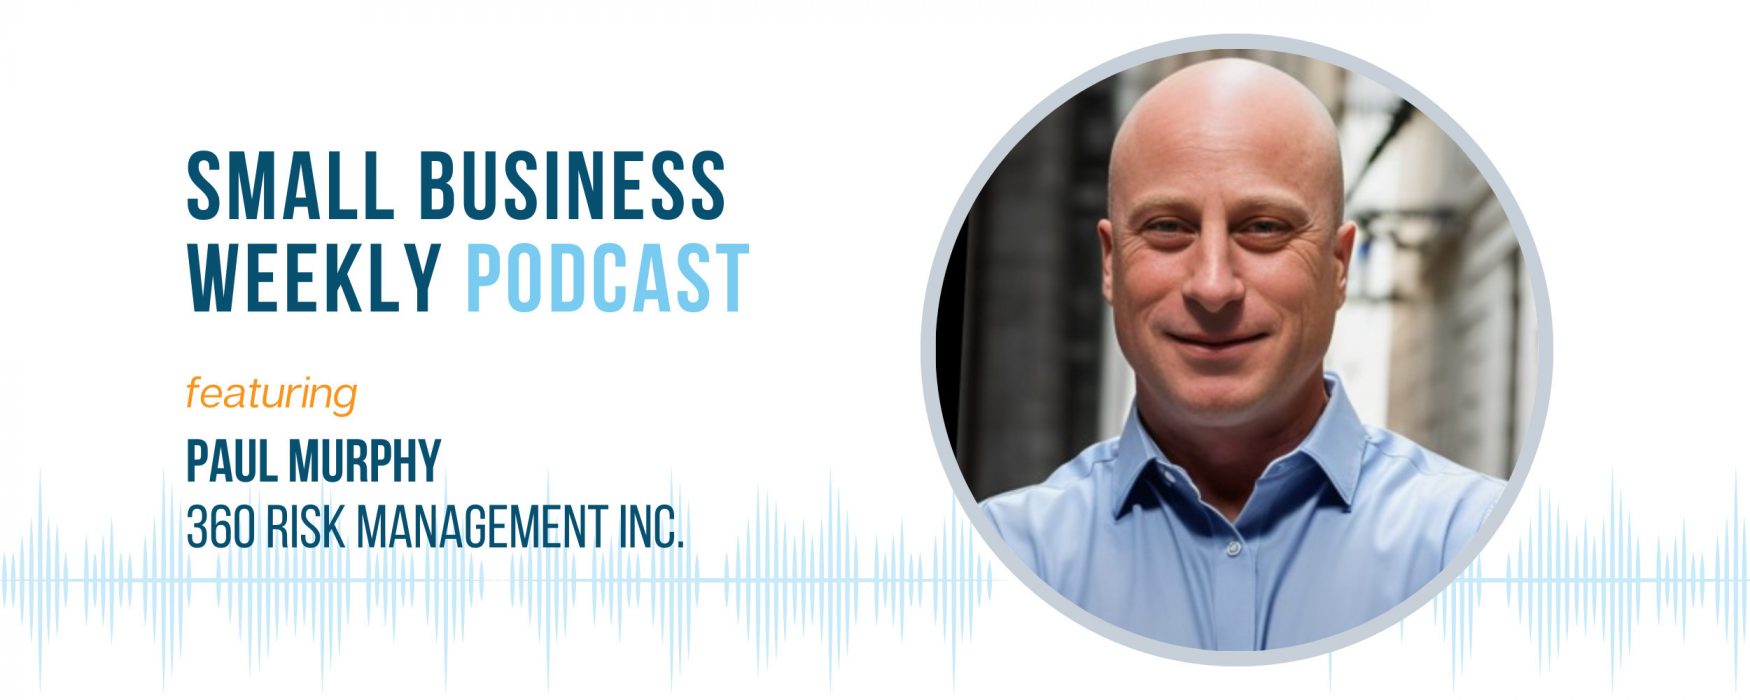 Small Business Weekly Podcast with Paul Murphy